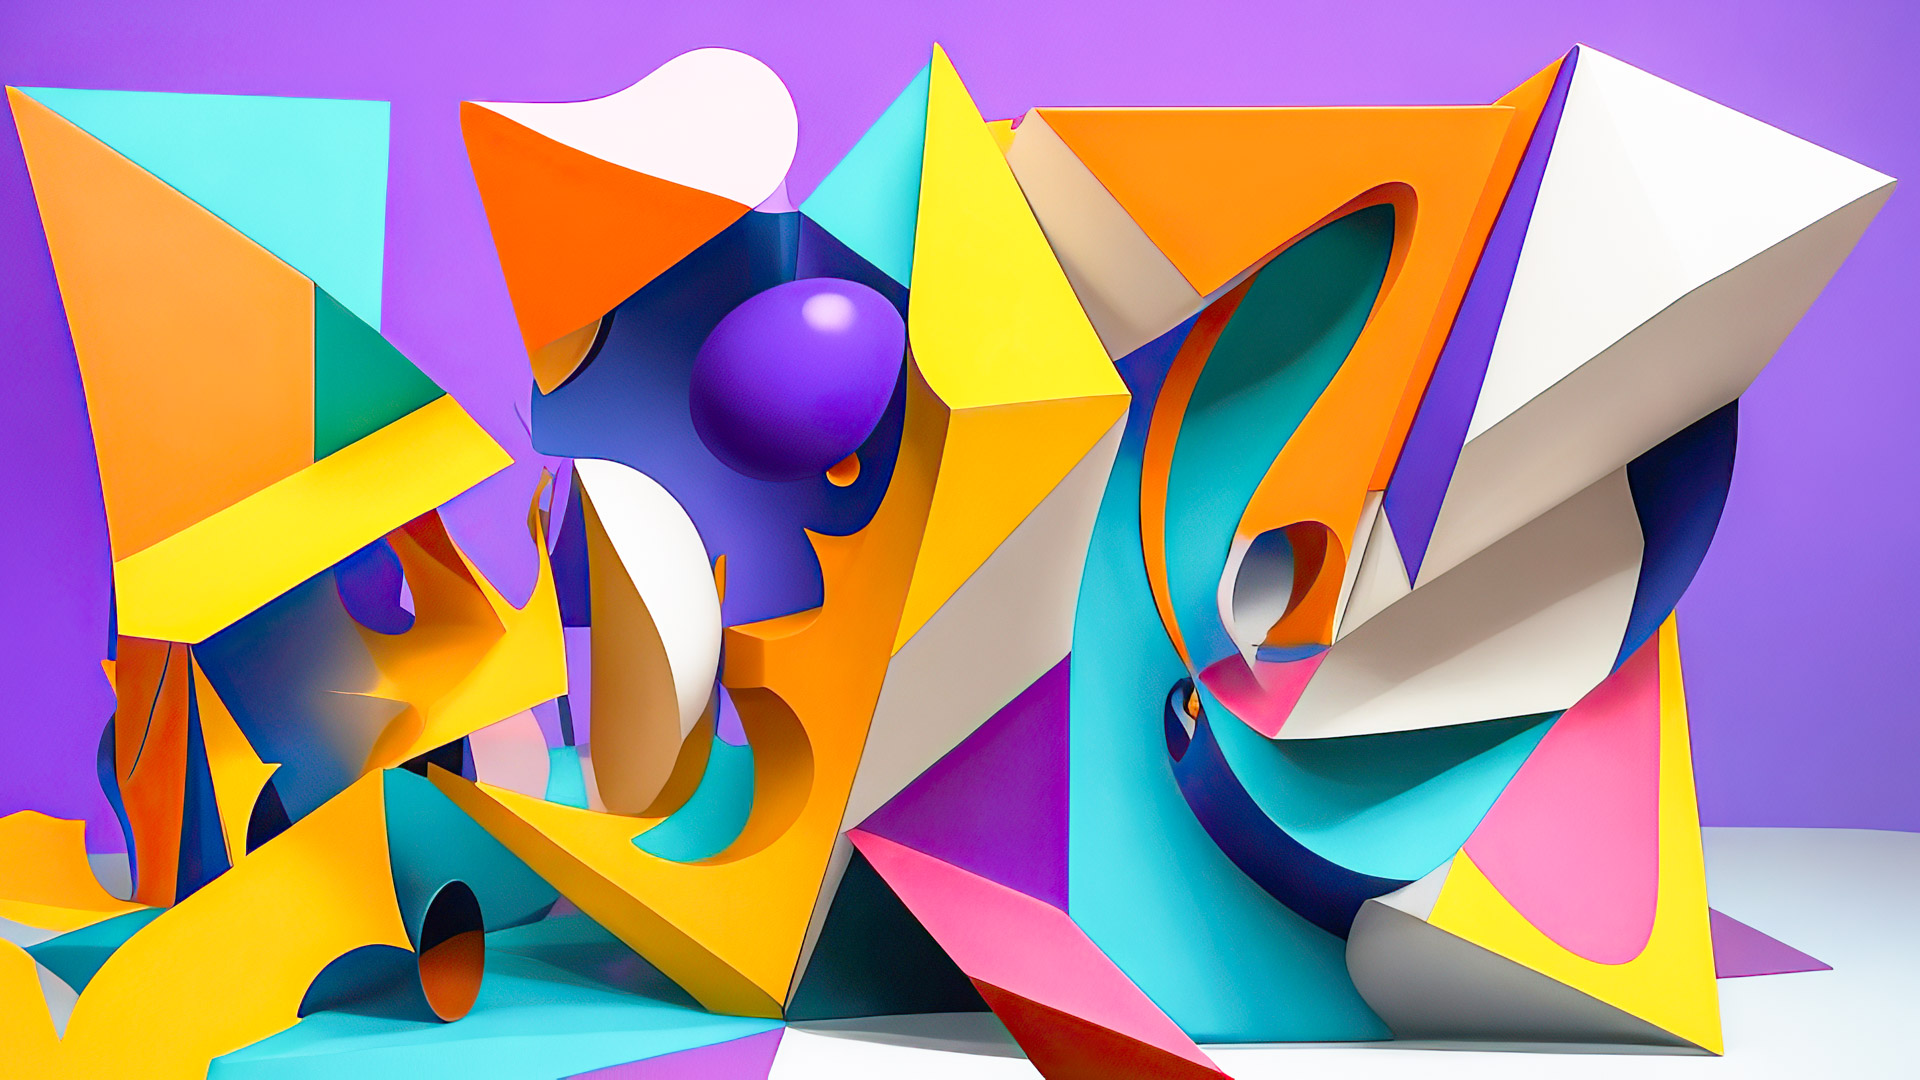 Engage with 3D geometrical colorful art on your PC with our captivating abstract HD wallpaper collection.